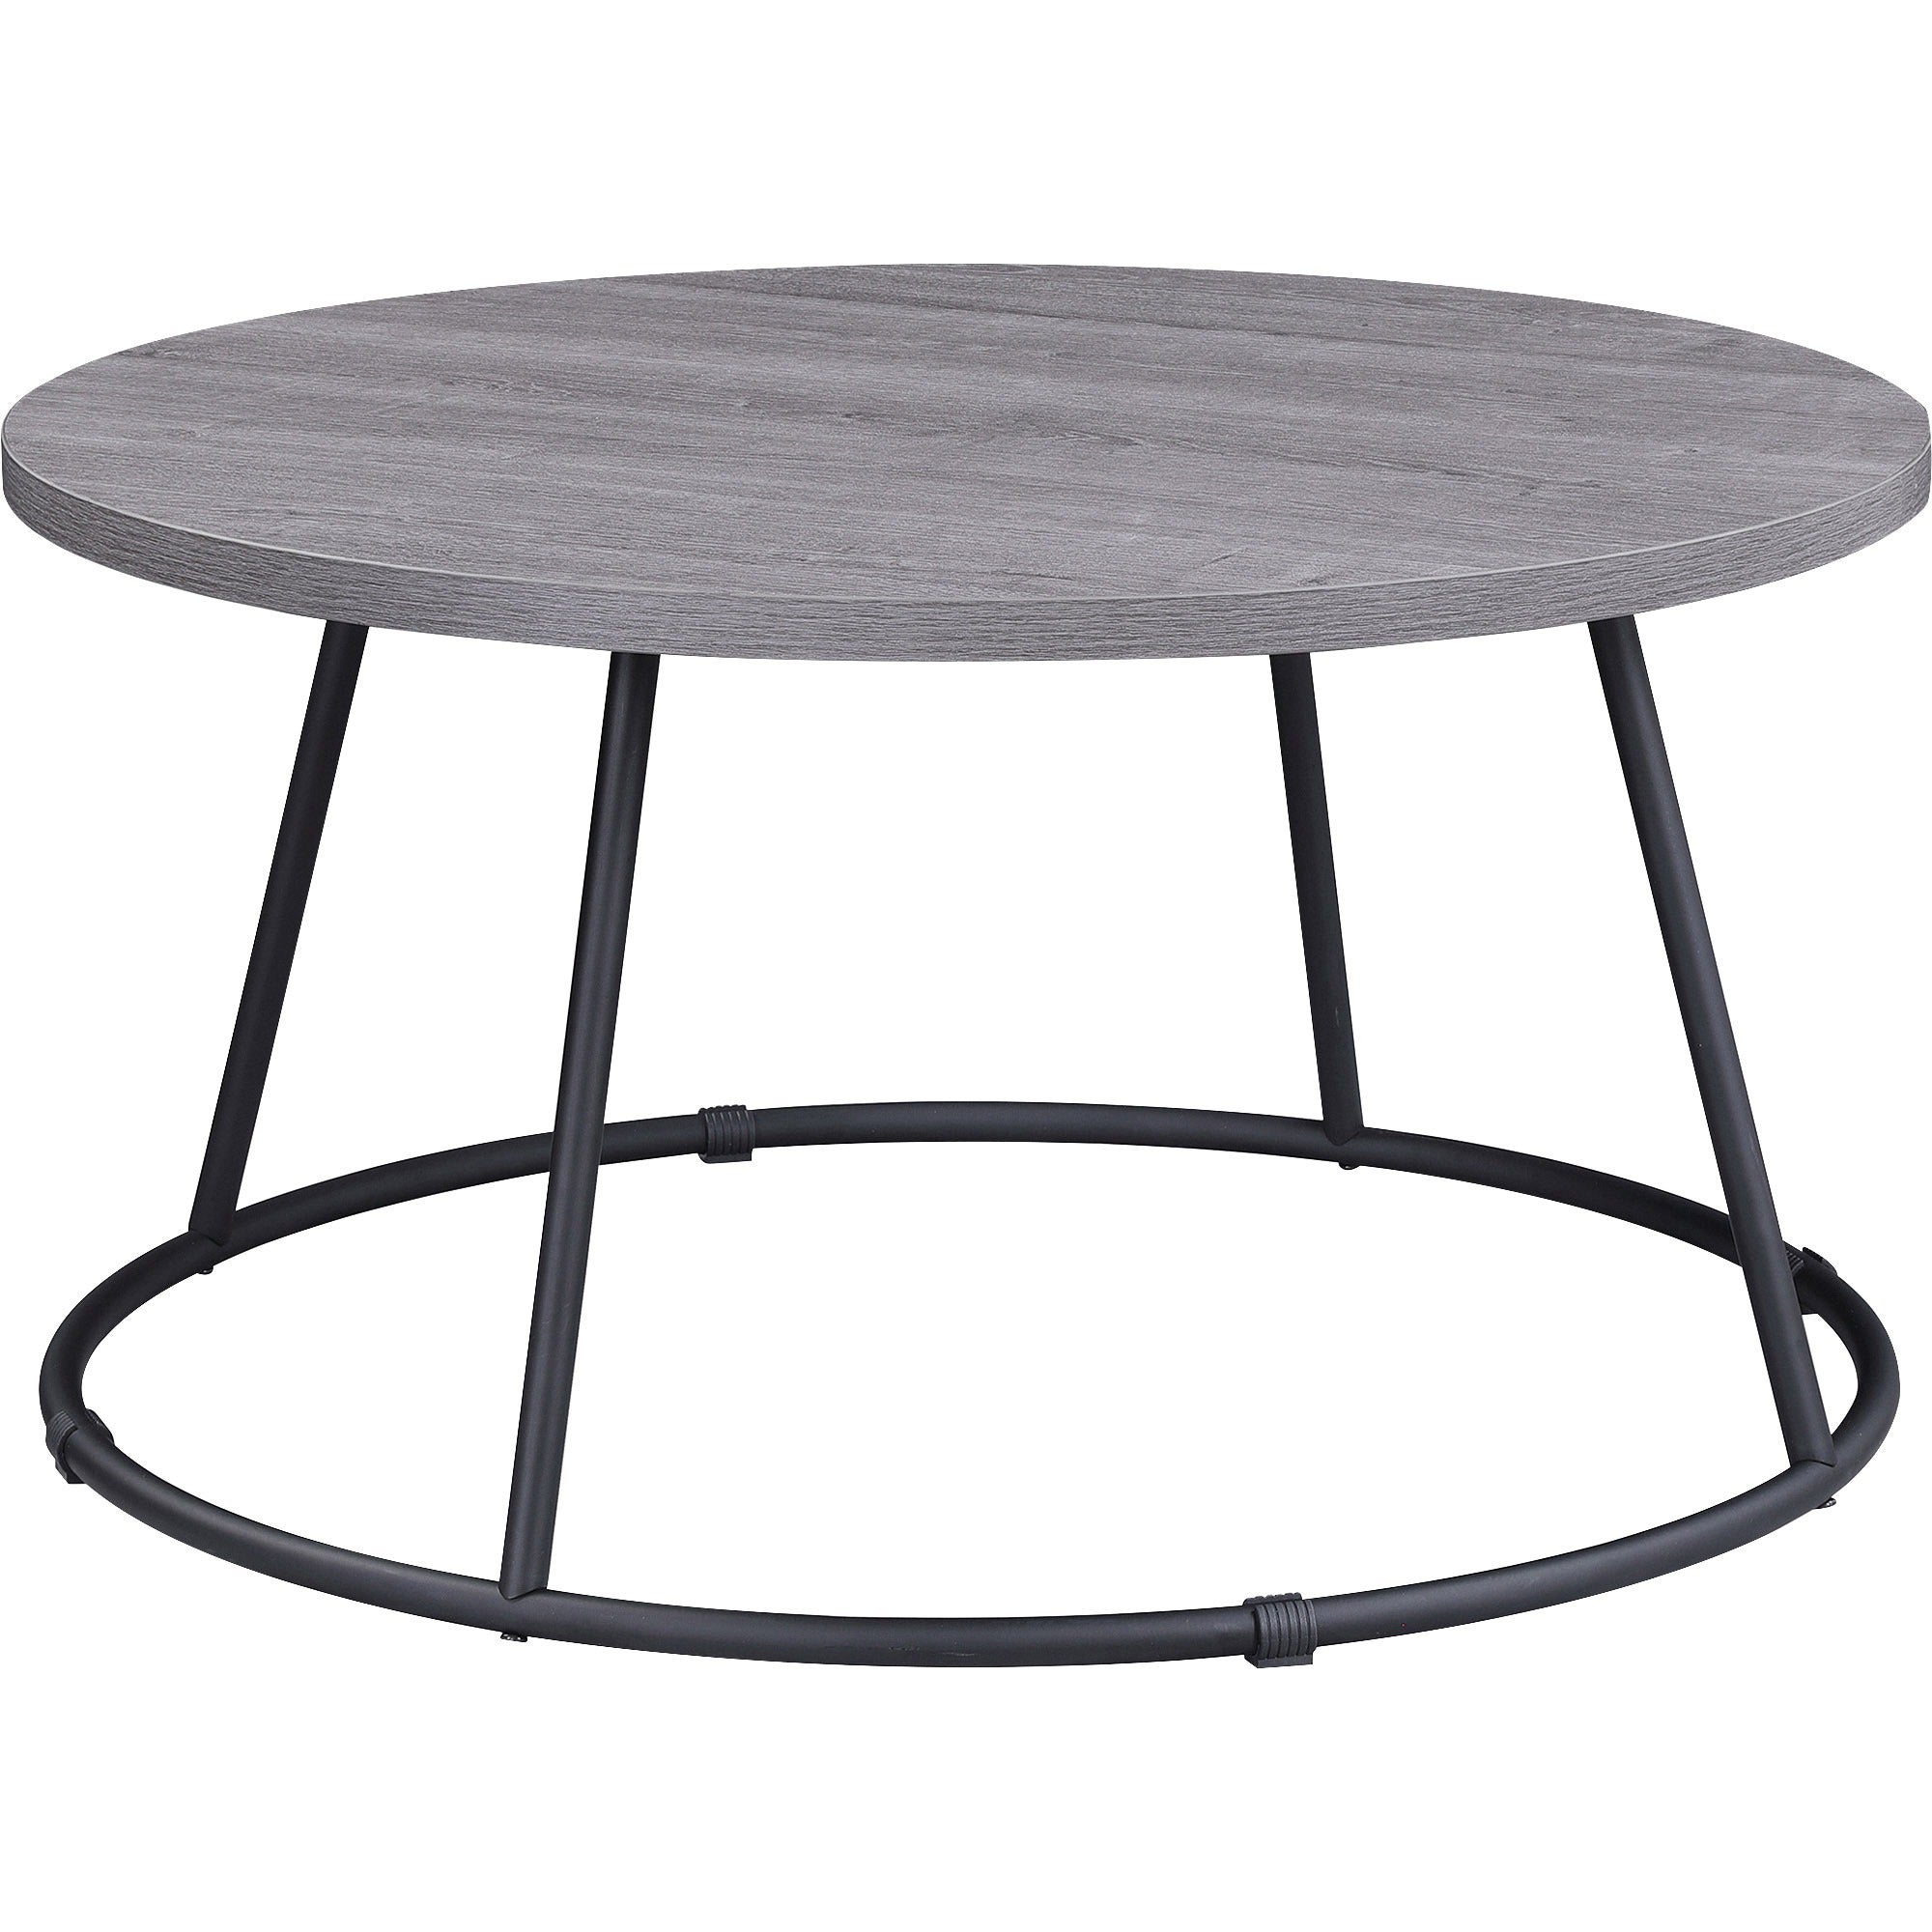 lorell-accession-coffee-table-for-table-topround-top-powder-coated-four-leg-base-4-legs-200-lb-capacity-x-1-table-top-thickness-x-3150-table-top-diameter-1675-height-assembly-required-weathered-charcoal-1-each_llr16260 - 1